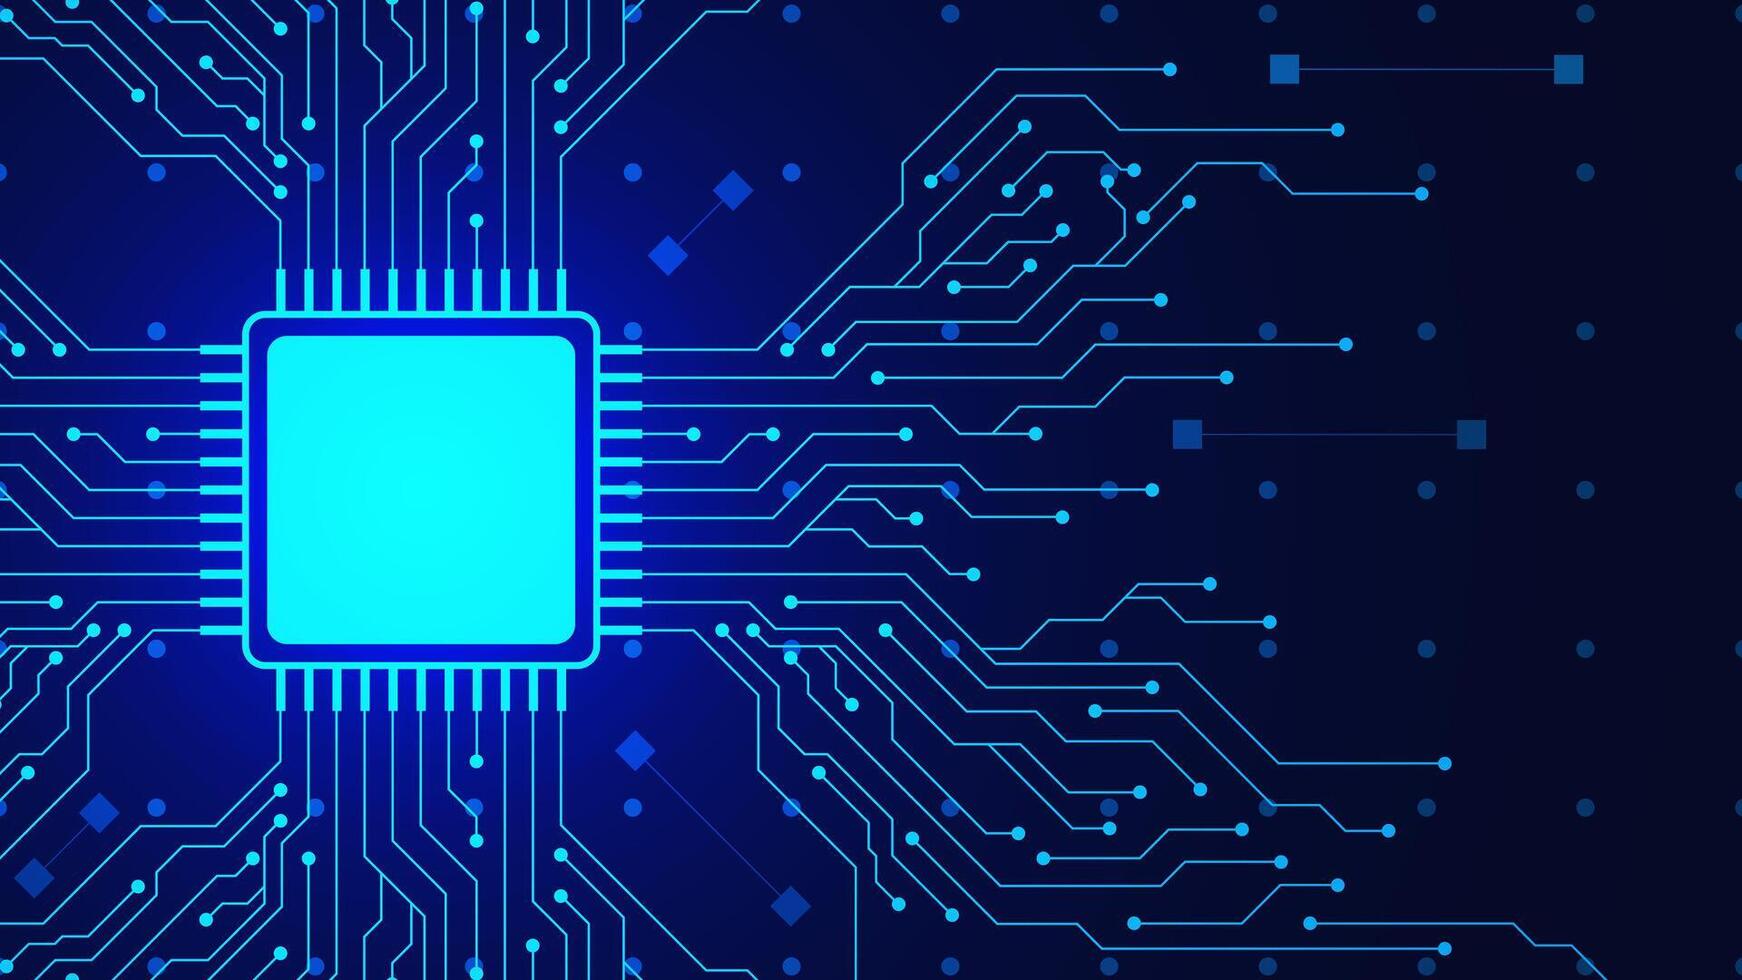 Microchip with circuit board. Central computer processor CPU and motherboard digital chip for modern technology concept background. Vector illustration.